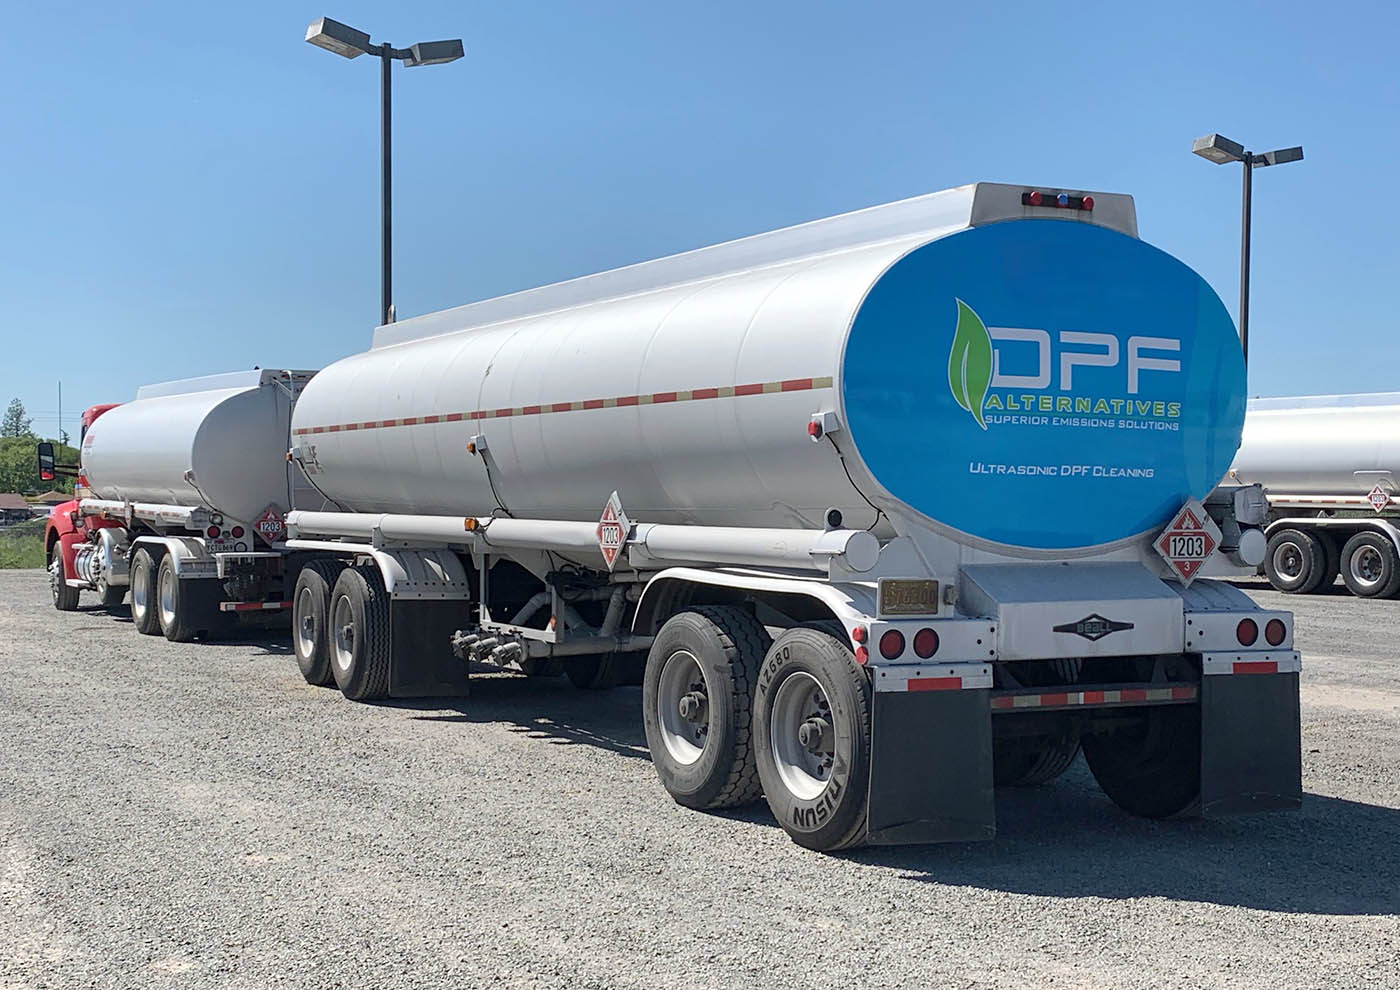 Back of a clean, large, reflective semi truck rig, contact DPF Alternatives for a DPF cleaning in Little Rock.